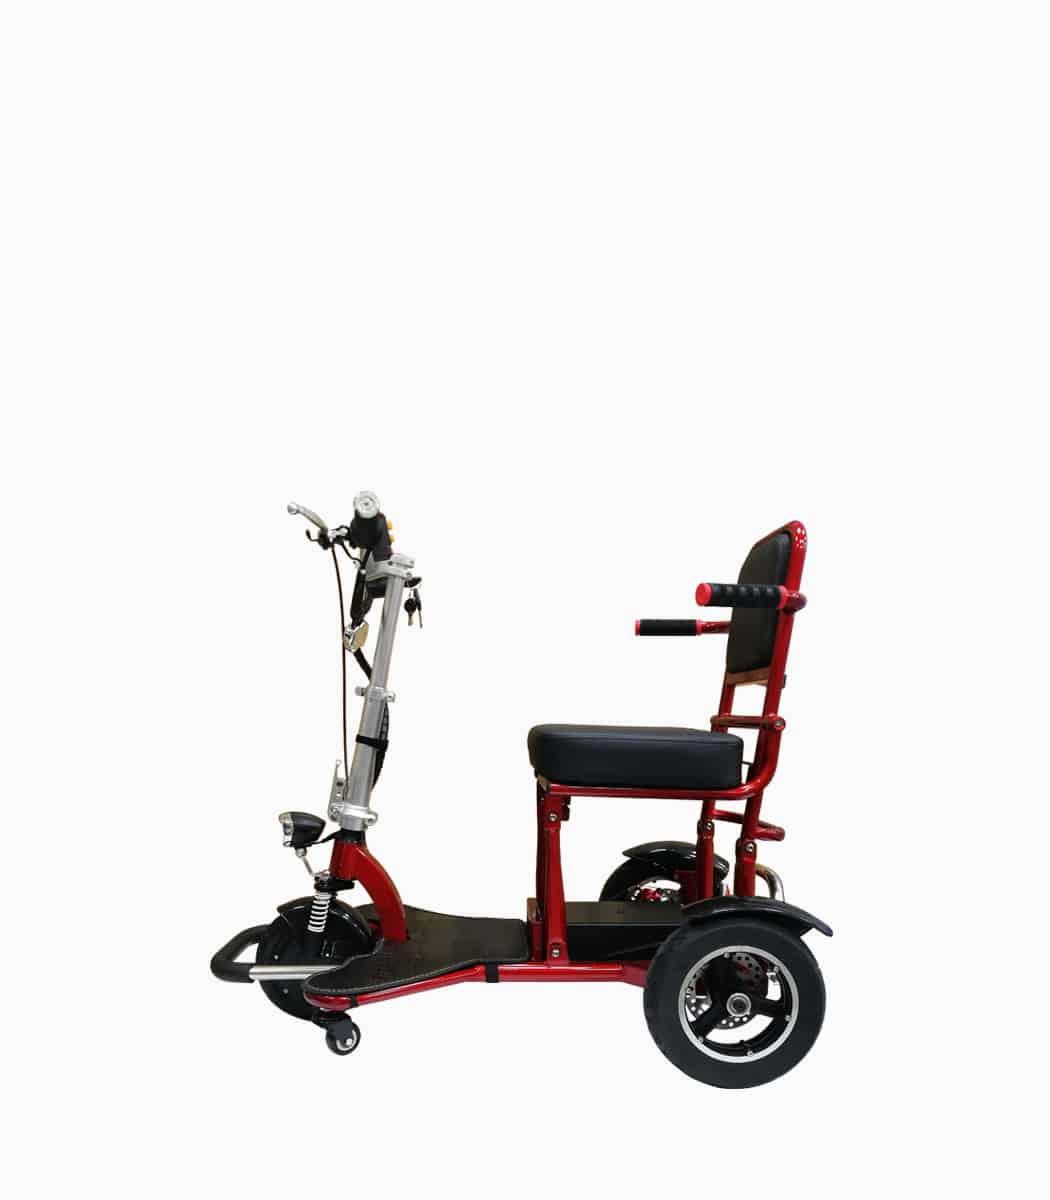 MOBOT FLEXI 4th Gen (RED) 3 wheels mobility scooter with child seat folded left V1